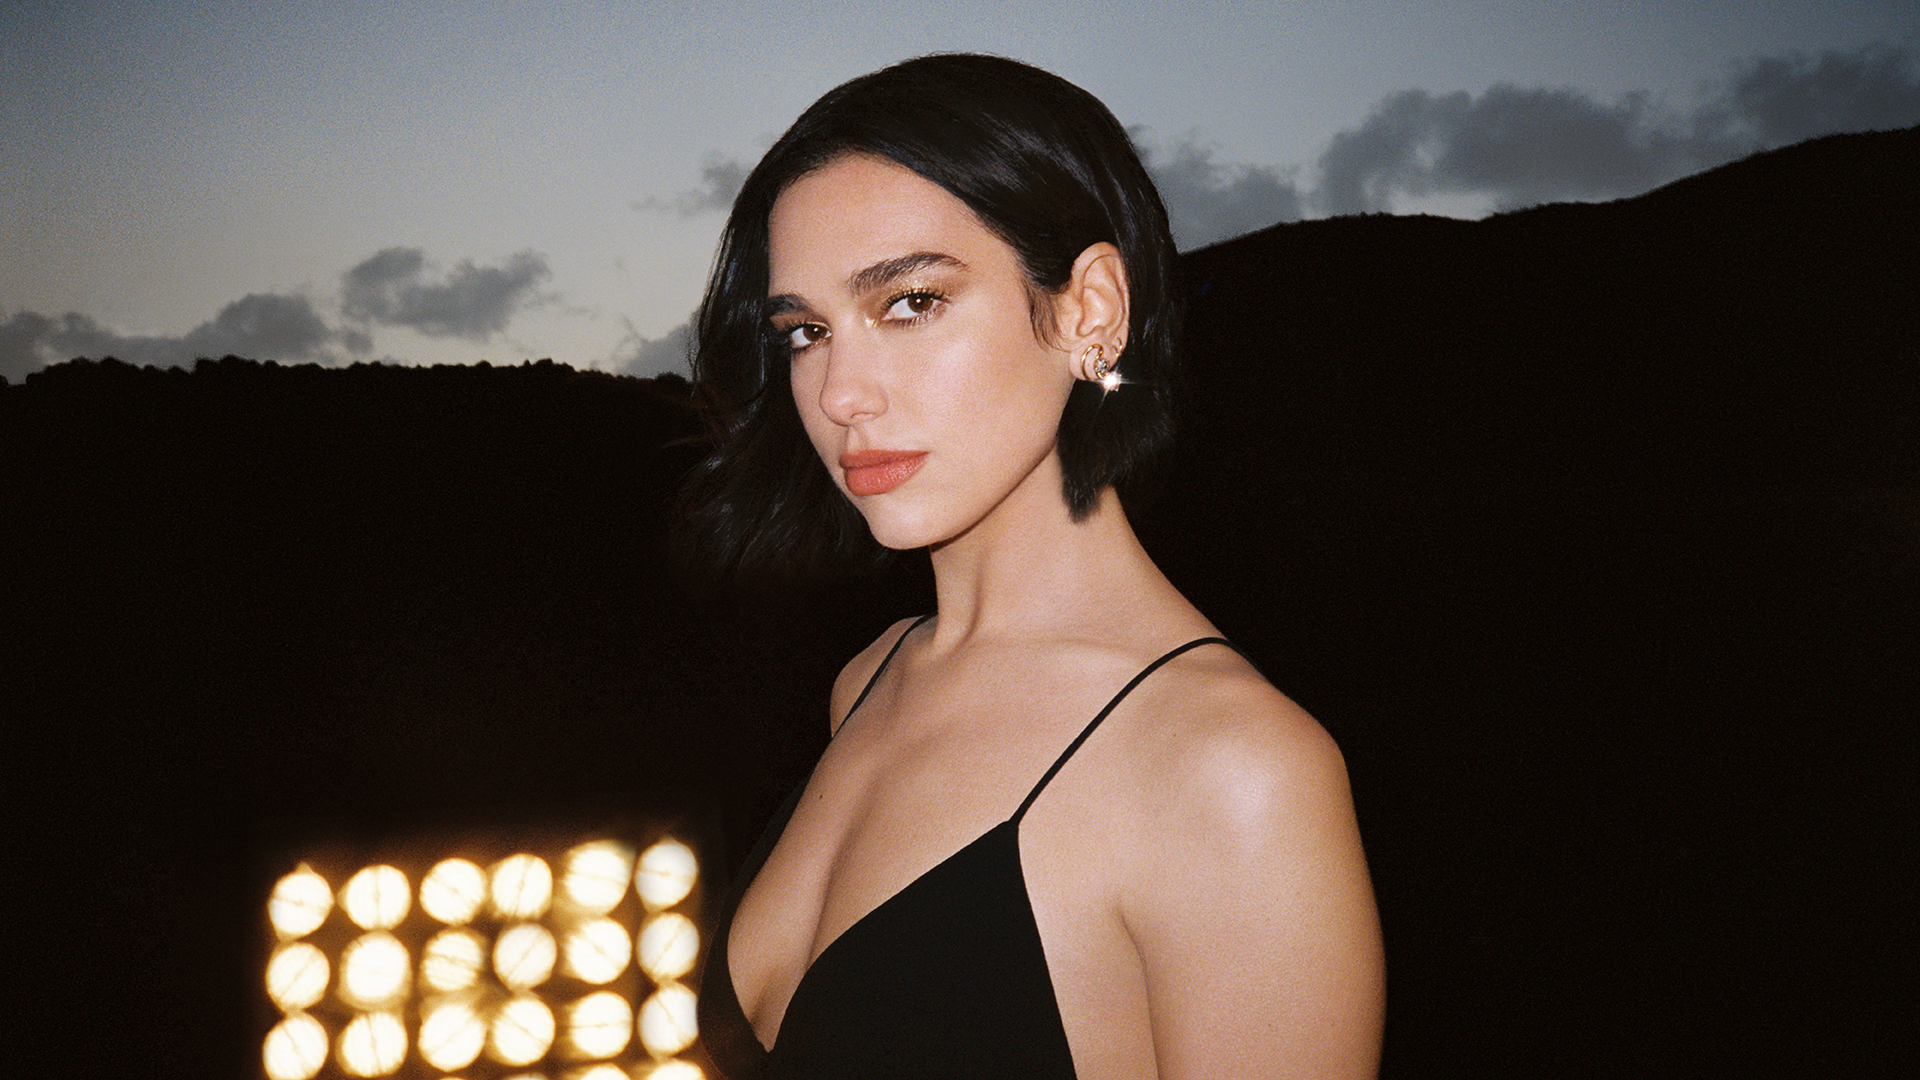 Dua Lipa declined the offer to perform at 2022 Qatar World Cup opening ceremony